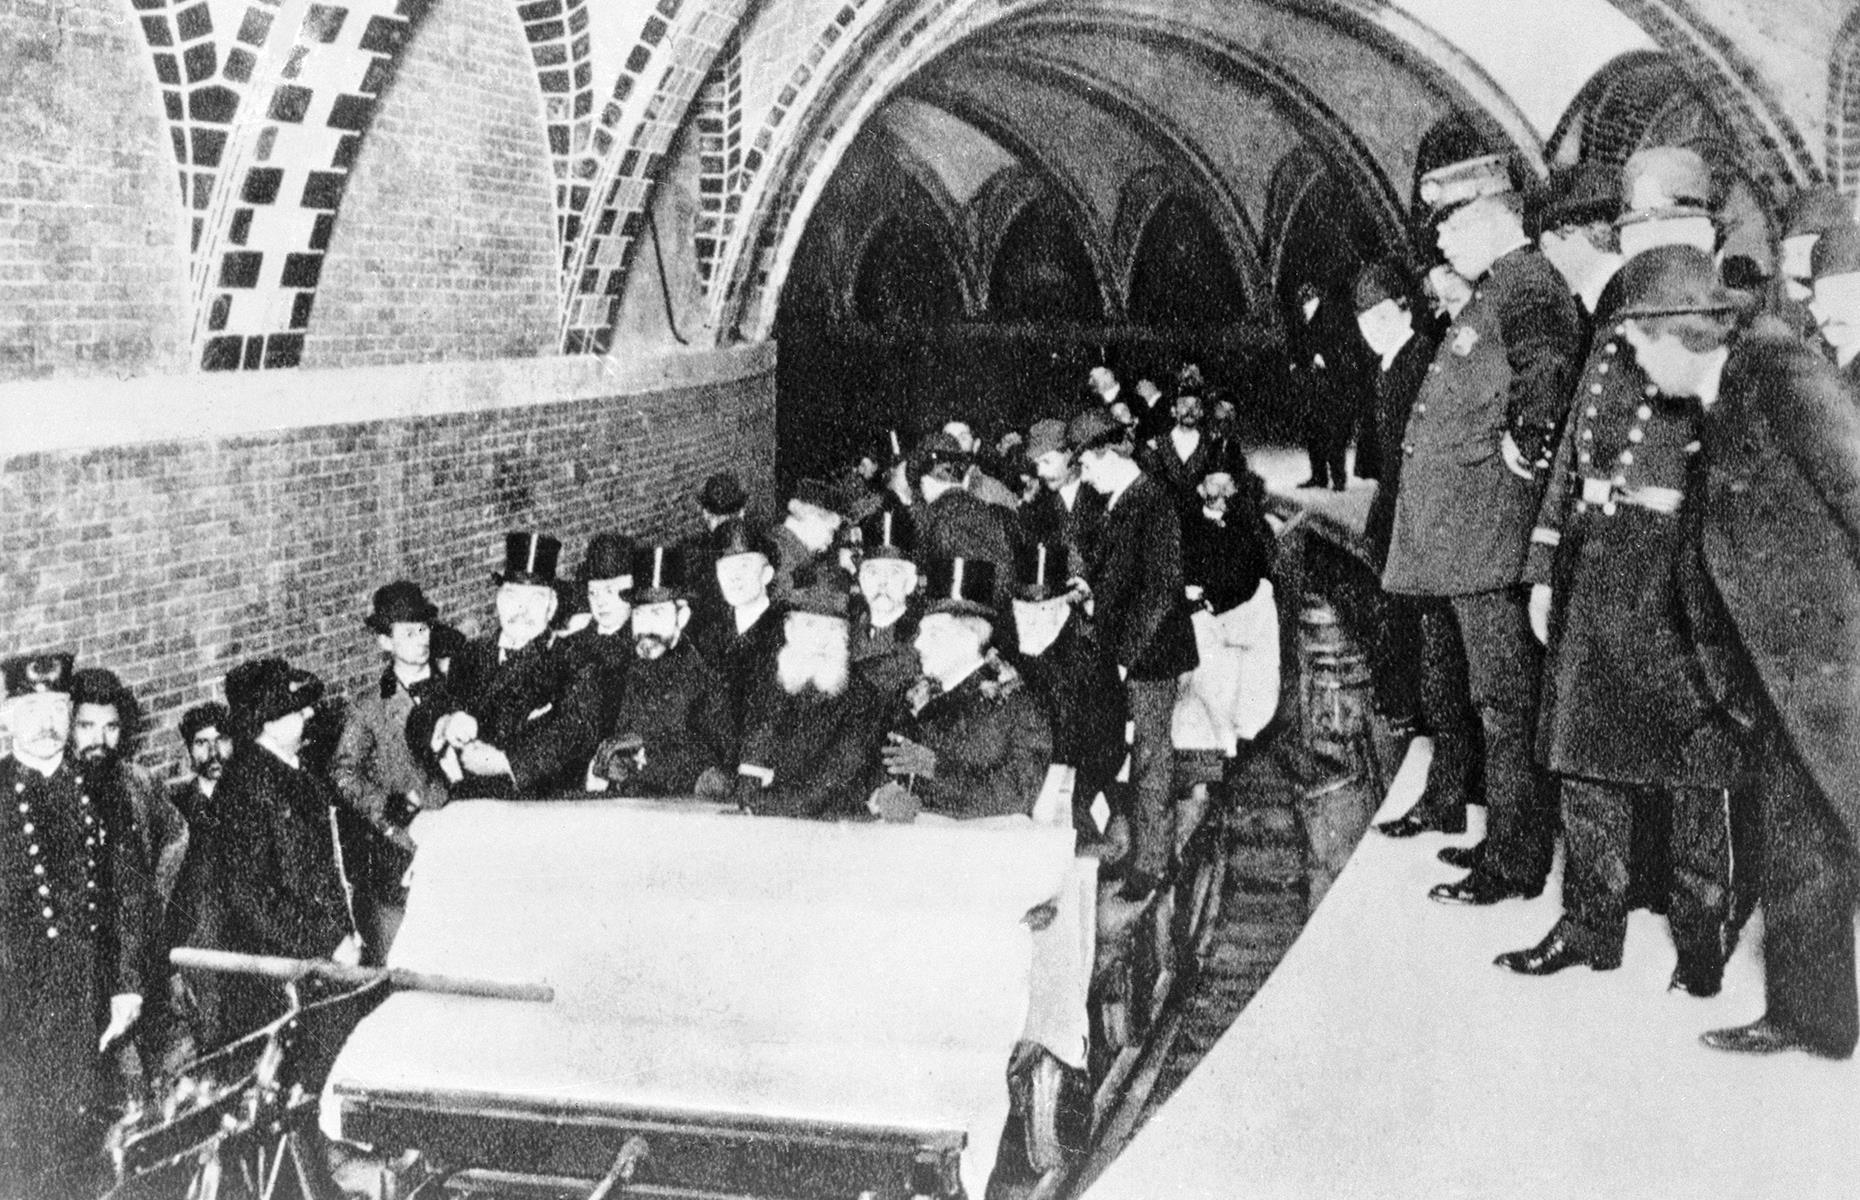 New York City's subway officially opened on 27 October 1904 and passengers rode the service in their thousands. This vintage snap shows city officials and business people embarking on the very first ride. The intricately tiled, vaulted ceilings of the completed City Hall station rise overhead.